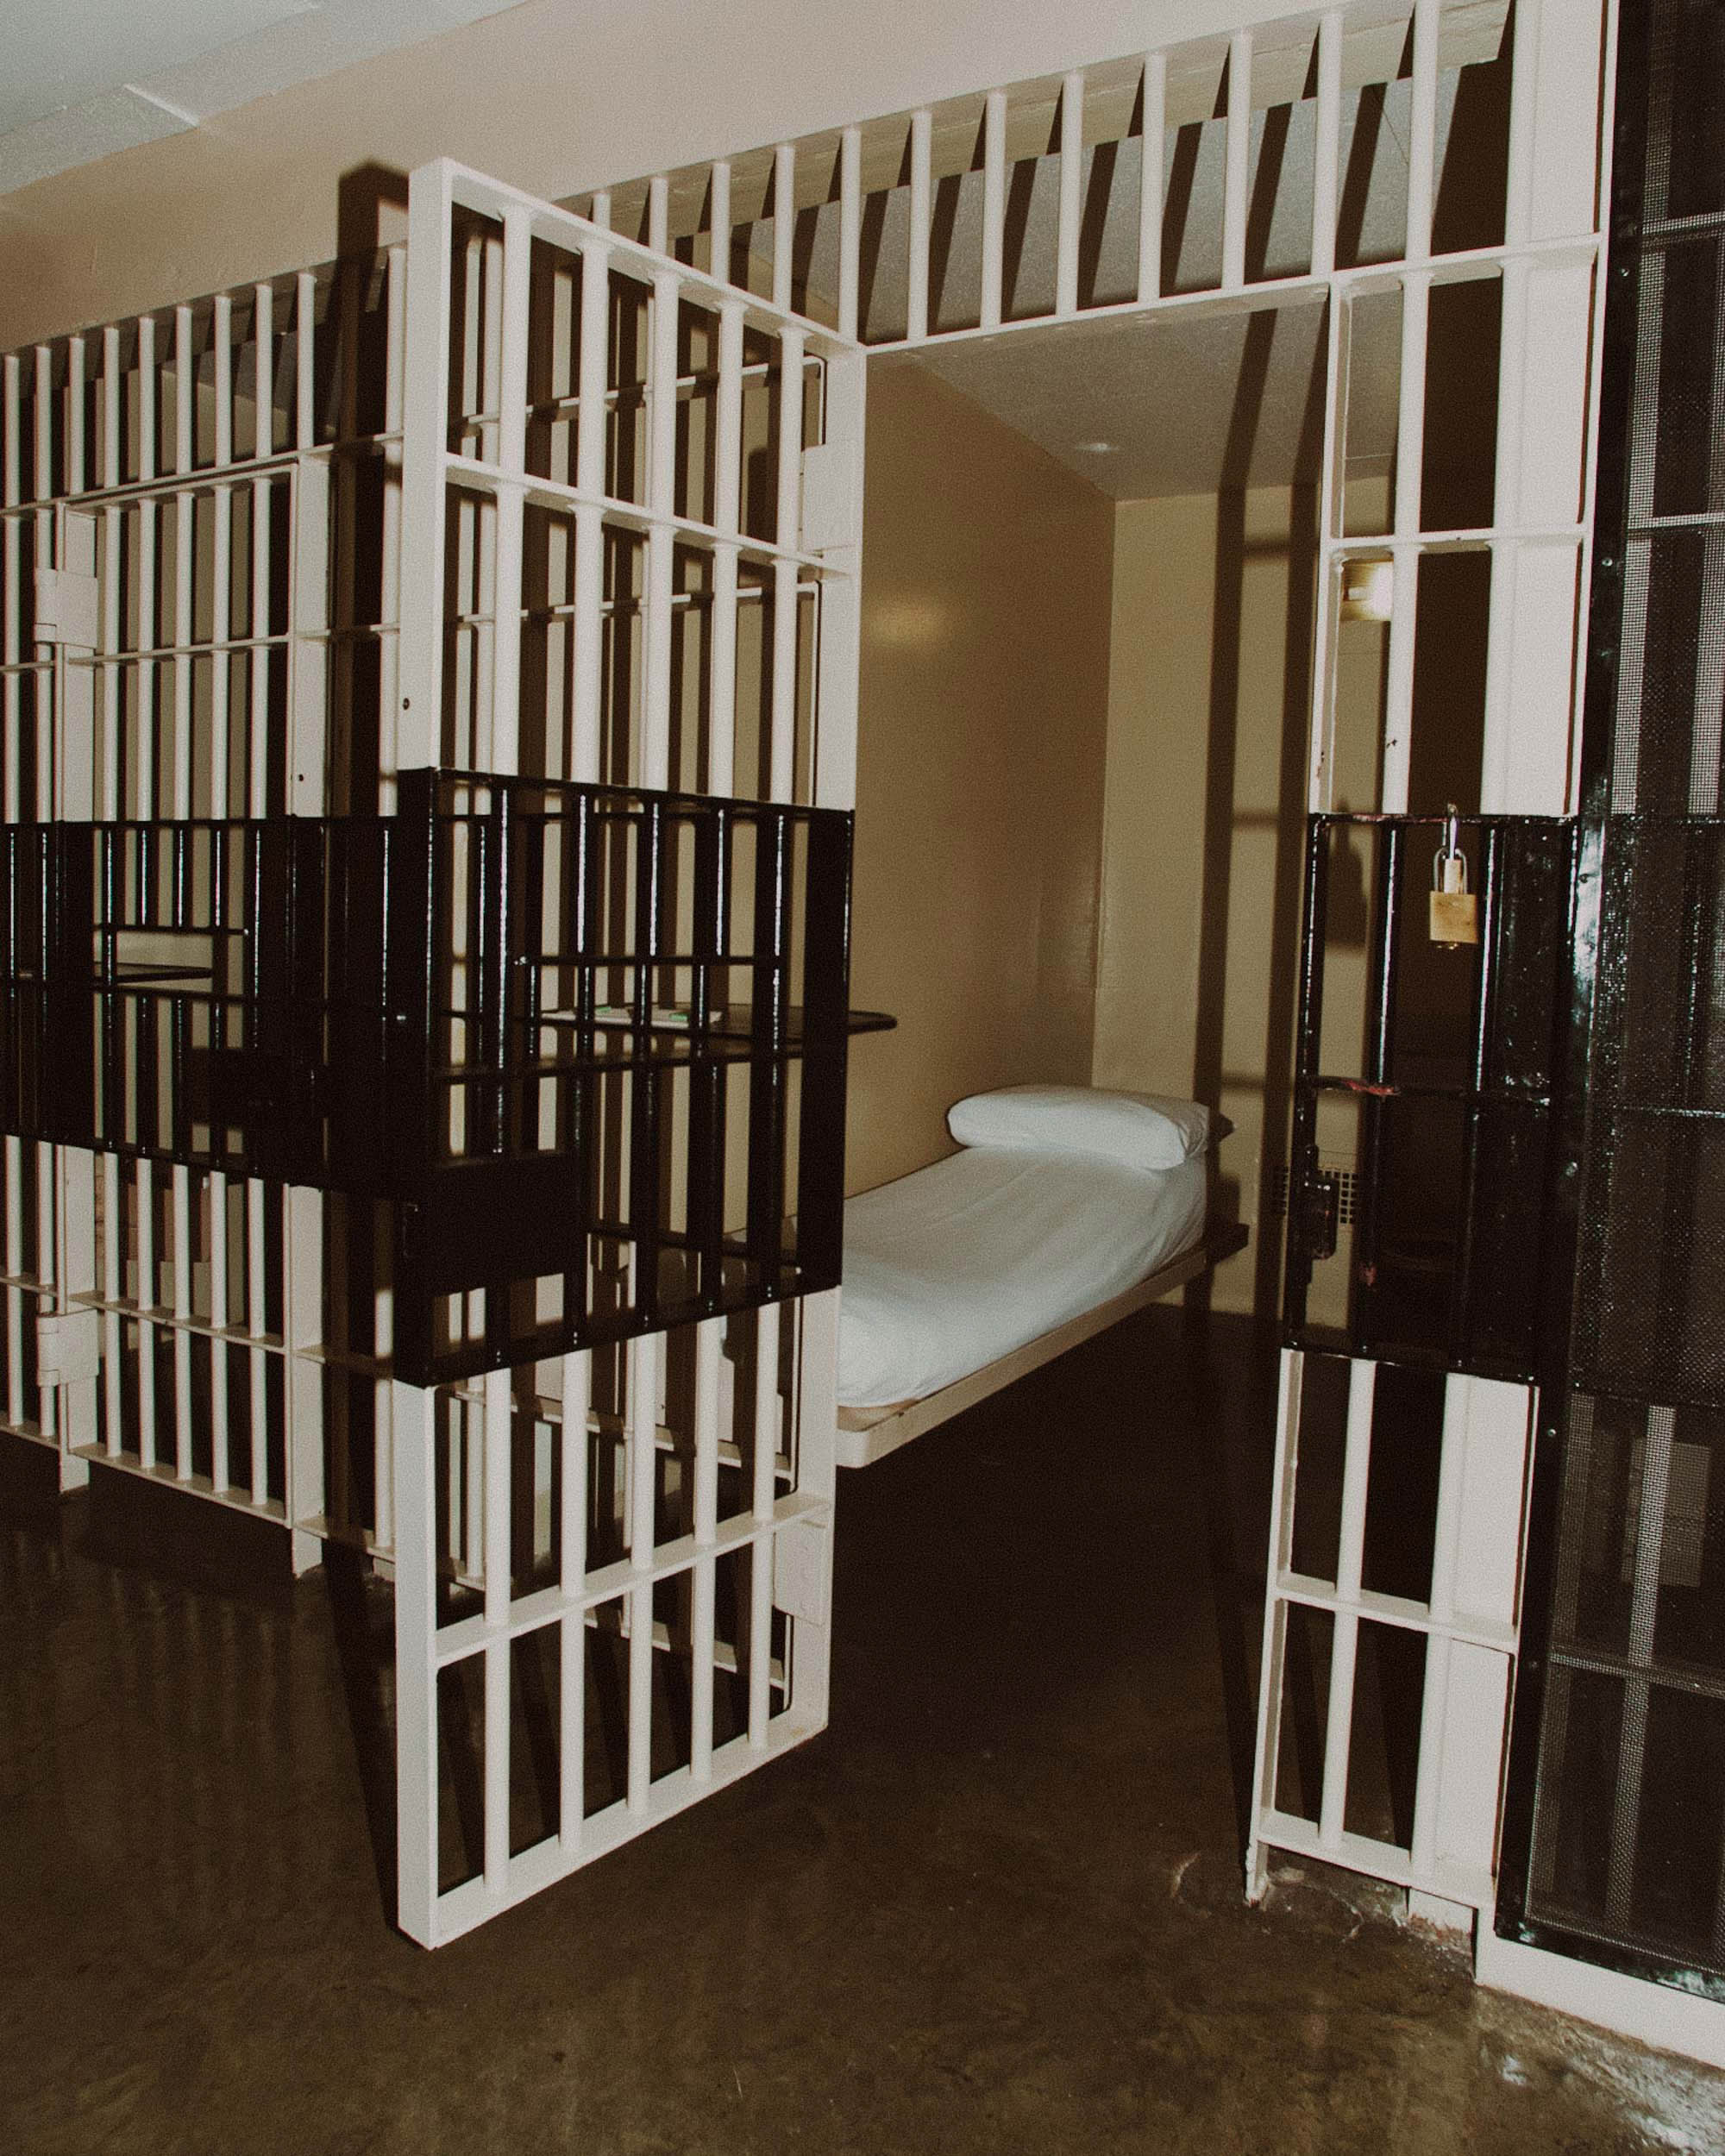 One of the cells inside the Walls Unit death house. After being transported from the Polunsky Unit all inmates come here prior to their scheduled execution time. Photo courtesy TDCJ.